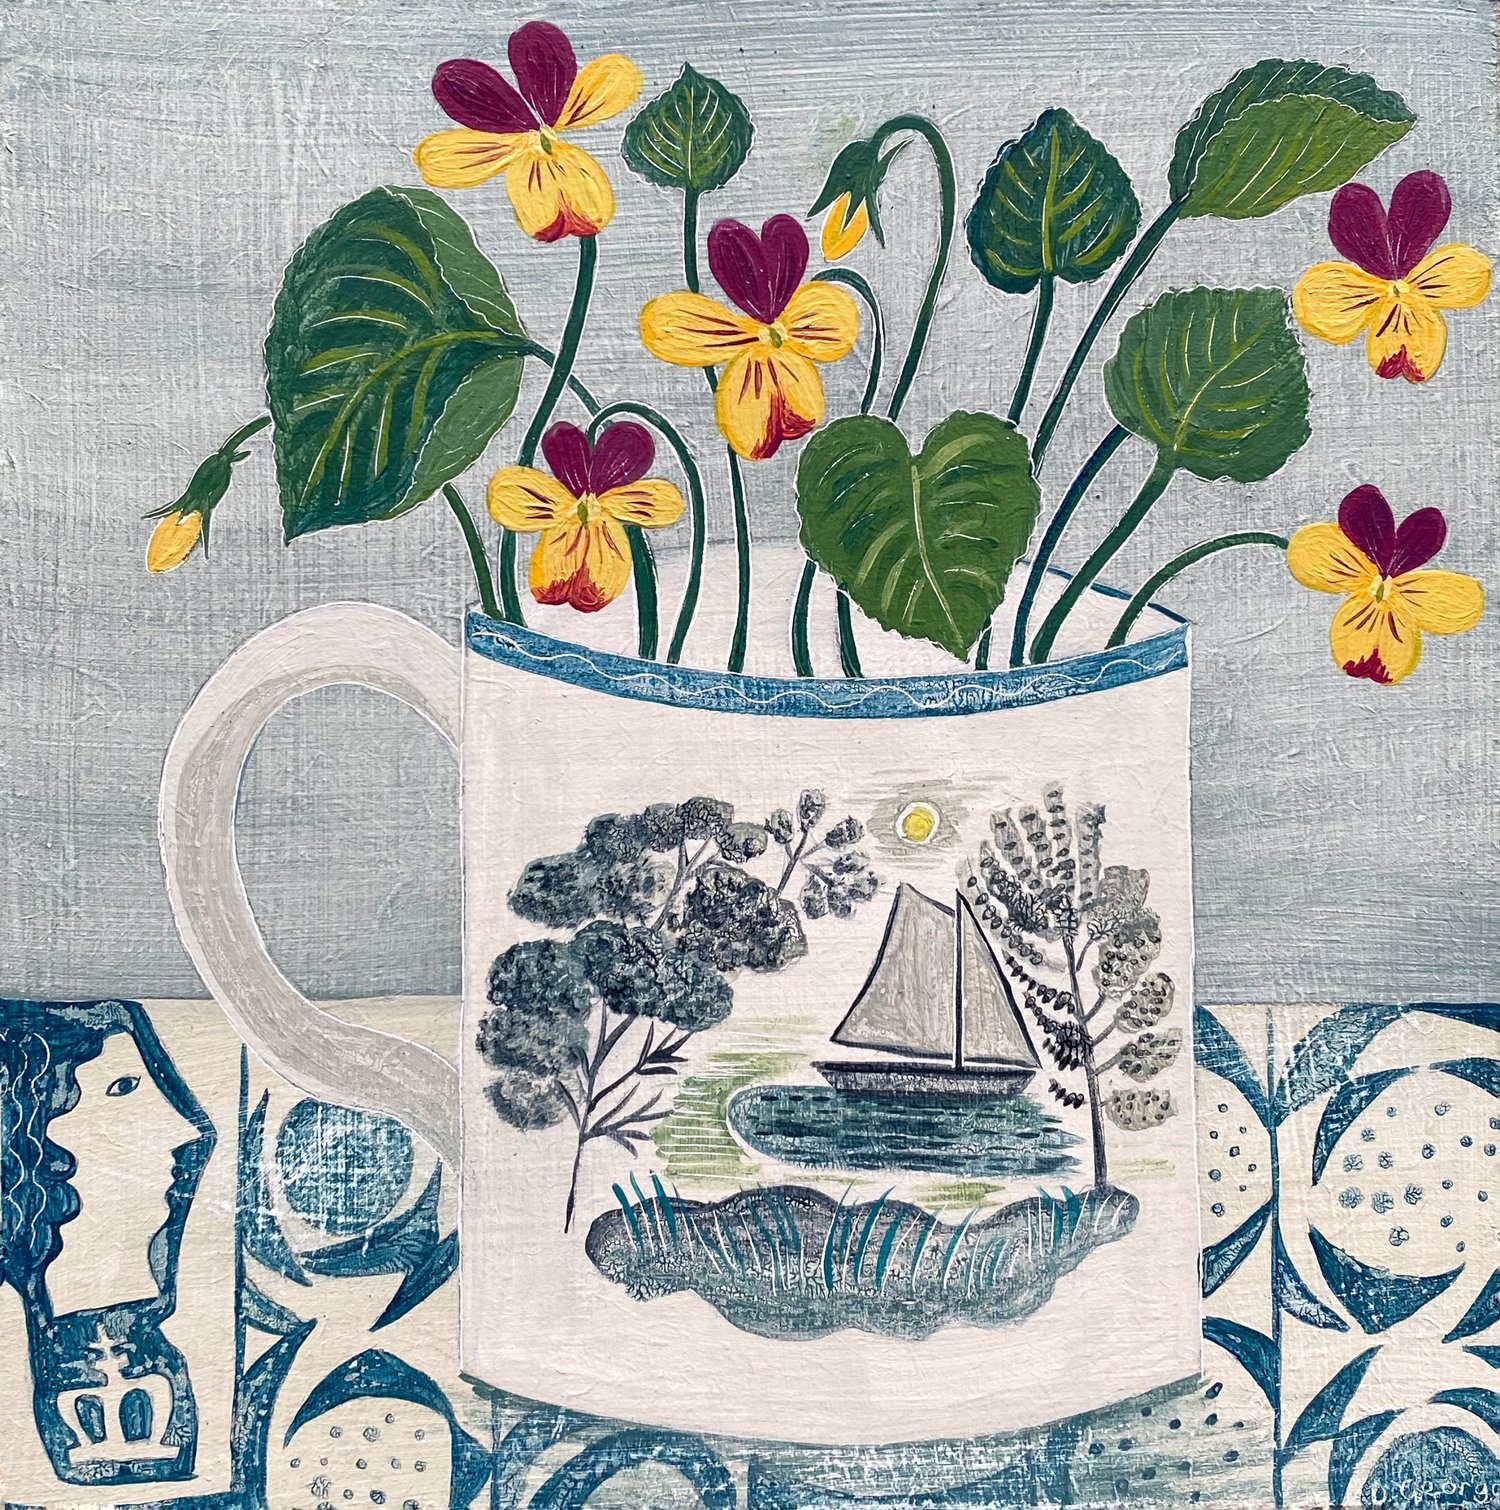 Image of Boat cup and violas